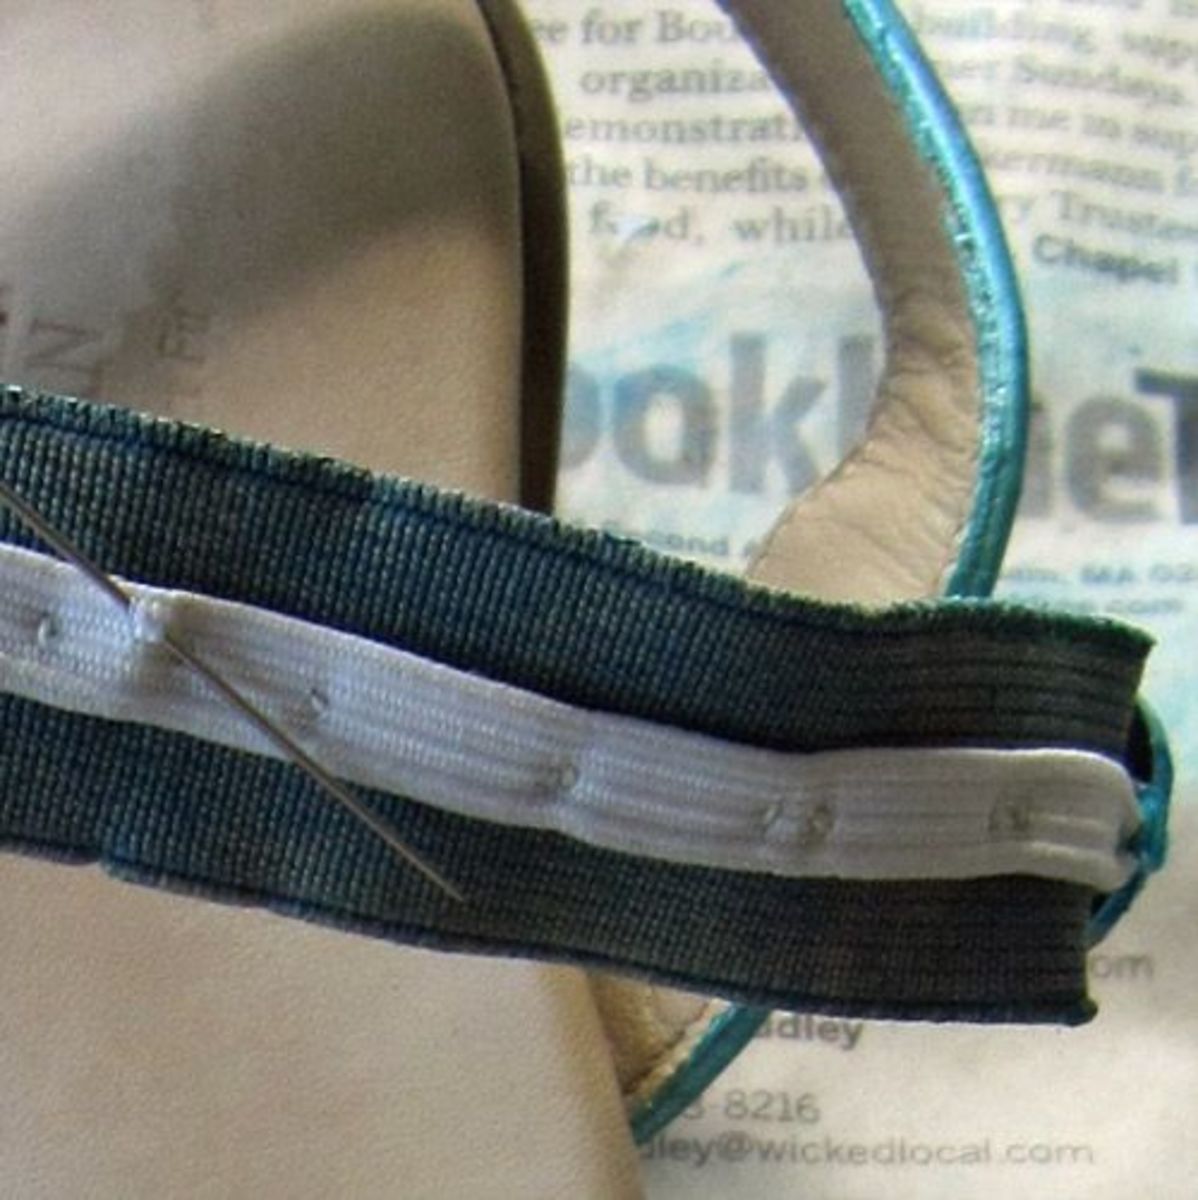 Reinforcing the stretched-out elastic strap with strong, thin elastic. Photo by Margaret Schindel, all rights reserved.